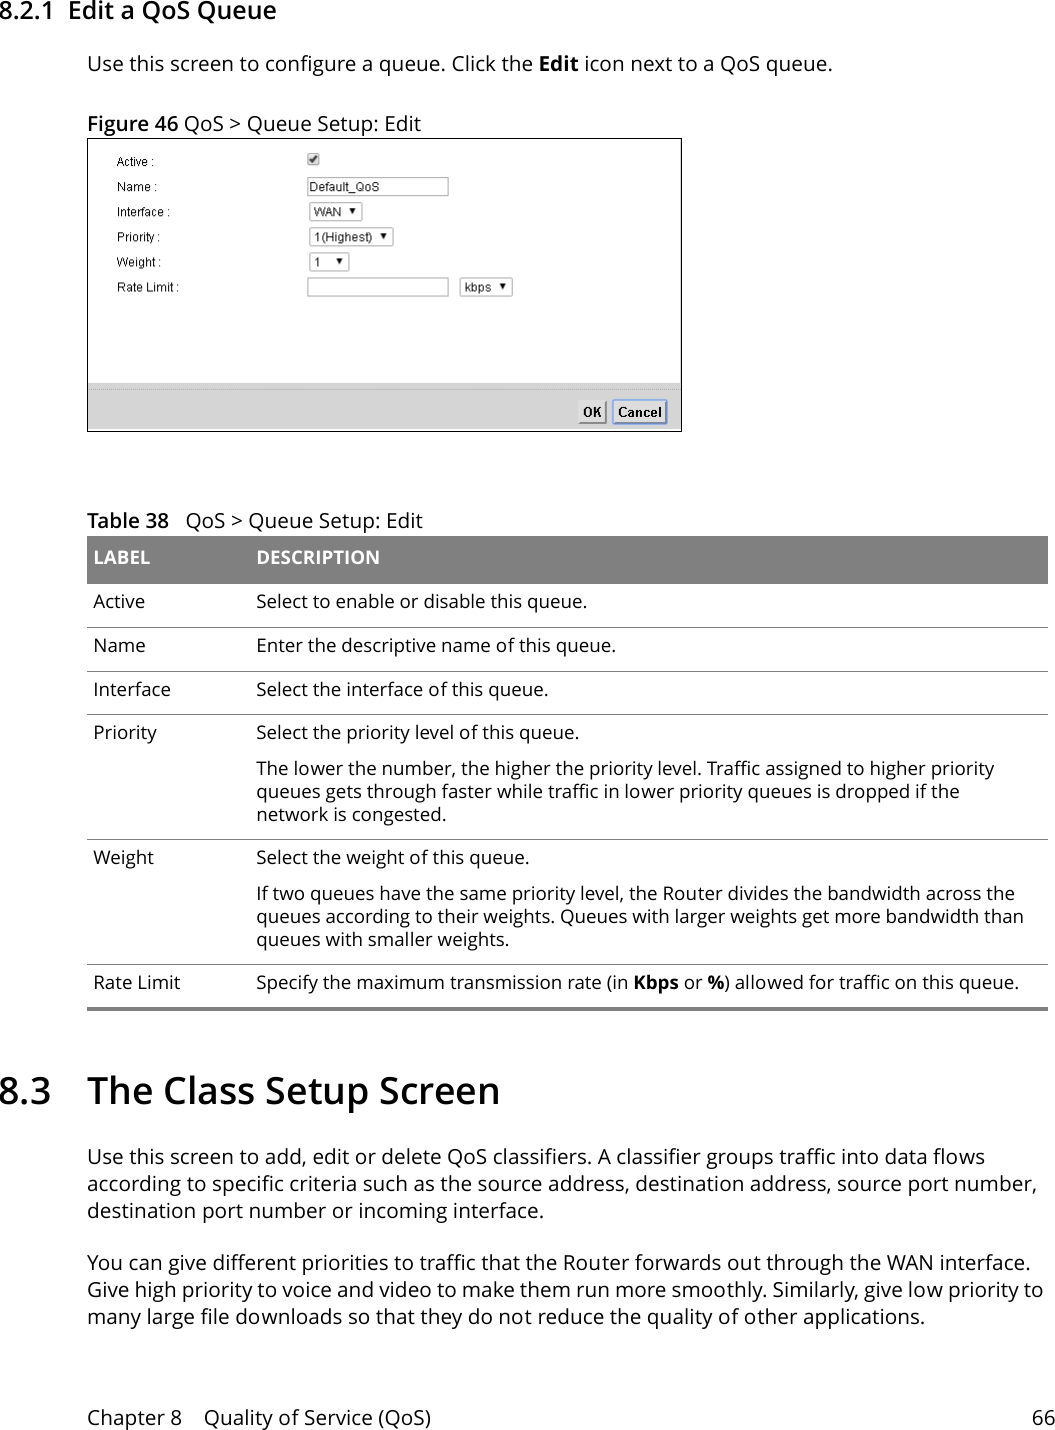 Chapter 8    Quality of Service (QoS) 668.2.1  Edit a QoS Queue Use this screen to configure a queue. Click the Edit icon next to a QoS queue. Figure 46 QoS &gt; Queue Setup: Edit  Table 38   QoS &gt; Queue Setup: Edit LABEL DESCRIPTIONActive Select to enable or disable this queue.Name Enter the descriptive name of this queue.Interface Select the interface of this queue.Priority Select the priority level of this queue.The lower the number, the higher the priority level. Traffic assigned to higher priority queues gets through faster while traffic in lower priority queues is dropped if the network is congested.Weight Select the weight of this queue. If two queues have the same priority level, the Router divides the bandwidth across the queues according to their weights. Queues with larger weights get more bandwidth than queues with smaller weights.Rate Limit Specify the maximum transmission rate (in Kbps or %) allowed for traffic on this queue. 8.3   The Class Setup Screen   Use this screen to add, edit or delete QoS classifiers. A classifier groups traffic into data flows according to specific criteria such as the source address, destination address, source port number, destination port number or incoming interface. You can give different priorities to traffic that the Router forwards out through the WAN interface. Give high priority to voice and video to make them run more smoothly. Similarly, give low priority to many large file downloads so that they do not reduce the quality of other applications. 